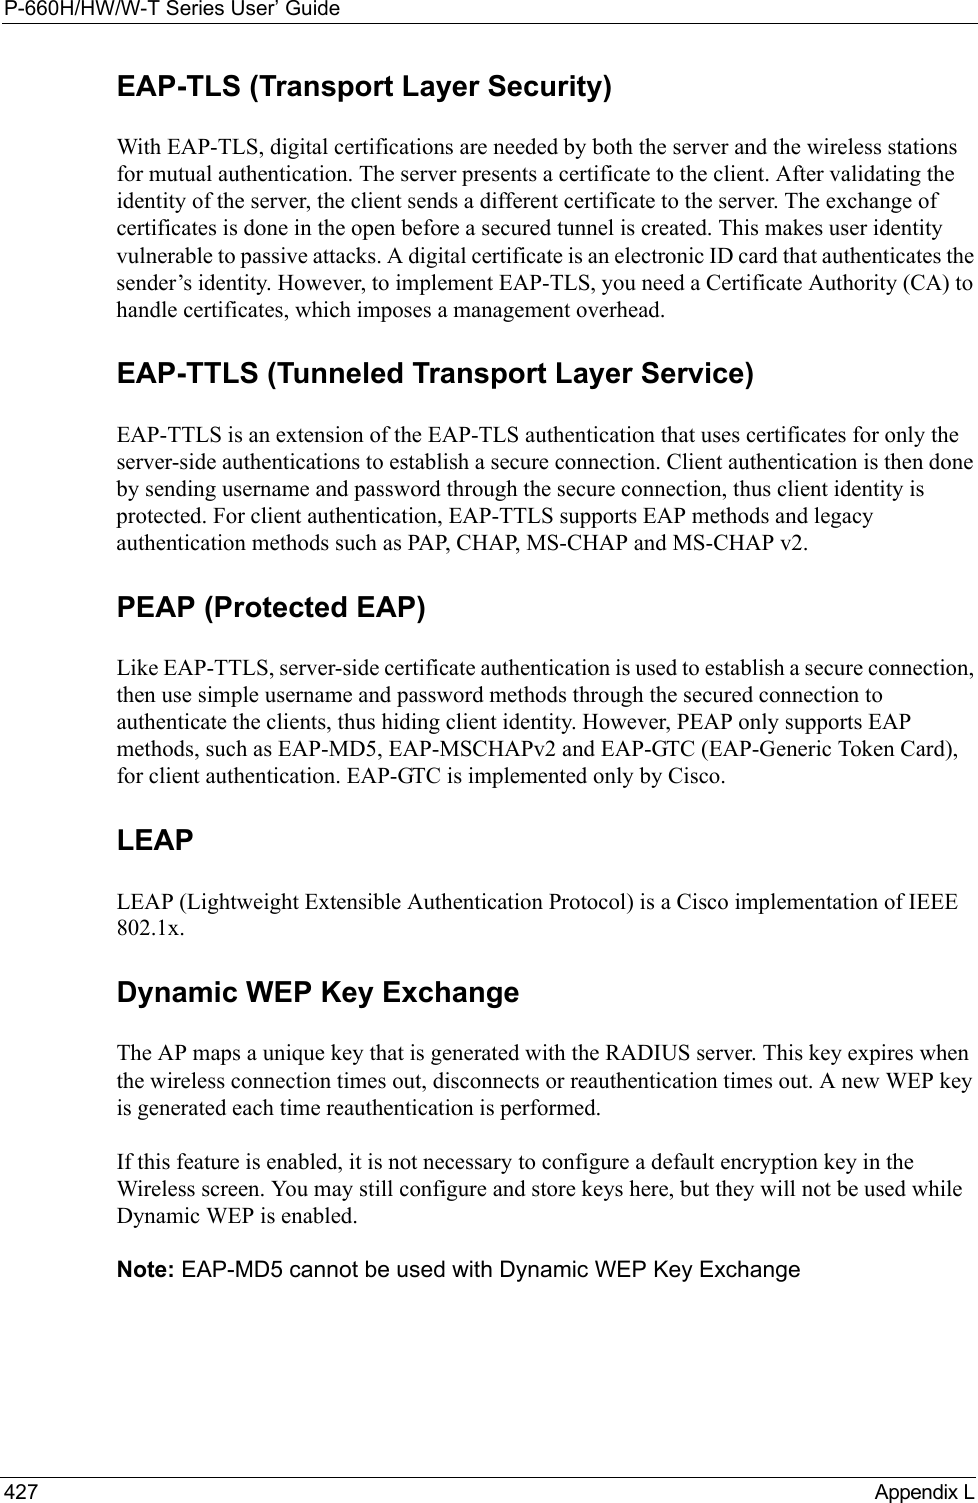 P-660H/HW/W-T Series User’ Guide427 Appendix LEAP-TLS (Transport Layer Security)With EAP-TLS, digital certifications are needed by both the server and the wireless stations for mutual authentication. The server presents a certificate to the client. After validating the identity of the server, the client sends a different certificate to the server. The exchange of certificates is done in the open before a secured tunnel is created. This makes user identity vulnerable to passive attacks. A digital certificate is an electronic ID card that authenticates the sender’s identity. However, to implement EAP-TLS, you need a Certificate Authority (CA) to handle certificates, which imposes a management overhead. EAP-TTLS (Tunneled Transport Layer Service) EAP-TTLS is an extension of the EAP-TLS authentication that uses certificates for only the server-side authentications to establish a secure connection. Client authentication is then done by sending username and password through the secure connection, thus client identity is protected. For client authentication, EAP-TTLS supports EAP methods and legacy authentication methods such as PAP, CHAP, MS-CHAP and MS-CHAP v2. PEAP (Protected EAP)   Like EAP-TTLS, server-side certificate authentication is used to establish a secure connection, then use simple username and password methods through the secured connection to authenticate the clients, thus hiding client identity. However, PEAP only supports EAP methods, such as EAP-MD5, EAP-MSCHAPv2 and EAP-GTC (EAP-Generic Token Card), for client authentication. EAP-GTC is implemented only by Cisco.LEAPLEAP (Lightweight Extensible Authentication Protocol) is a Cisco implementation of IEEE 802.1x. Dynamic WEP Key ExchangeThe AP maps a unique key that is generated with the RADIUS server. This key expires when the wireless connection times out, disconnects or reauthentication times out. A new WEP key is generated each time reauthentication is performed.If this feature is enabled, it is not necessary to configure a default encryption key in the Wireless screen. You may still configure and store keys here, but they will not be used while Dynamic WEP is enabled.Note: EAP-MD5 cannot be used with Dynamic WEP Key Exchange